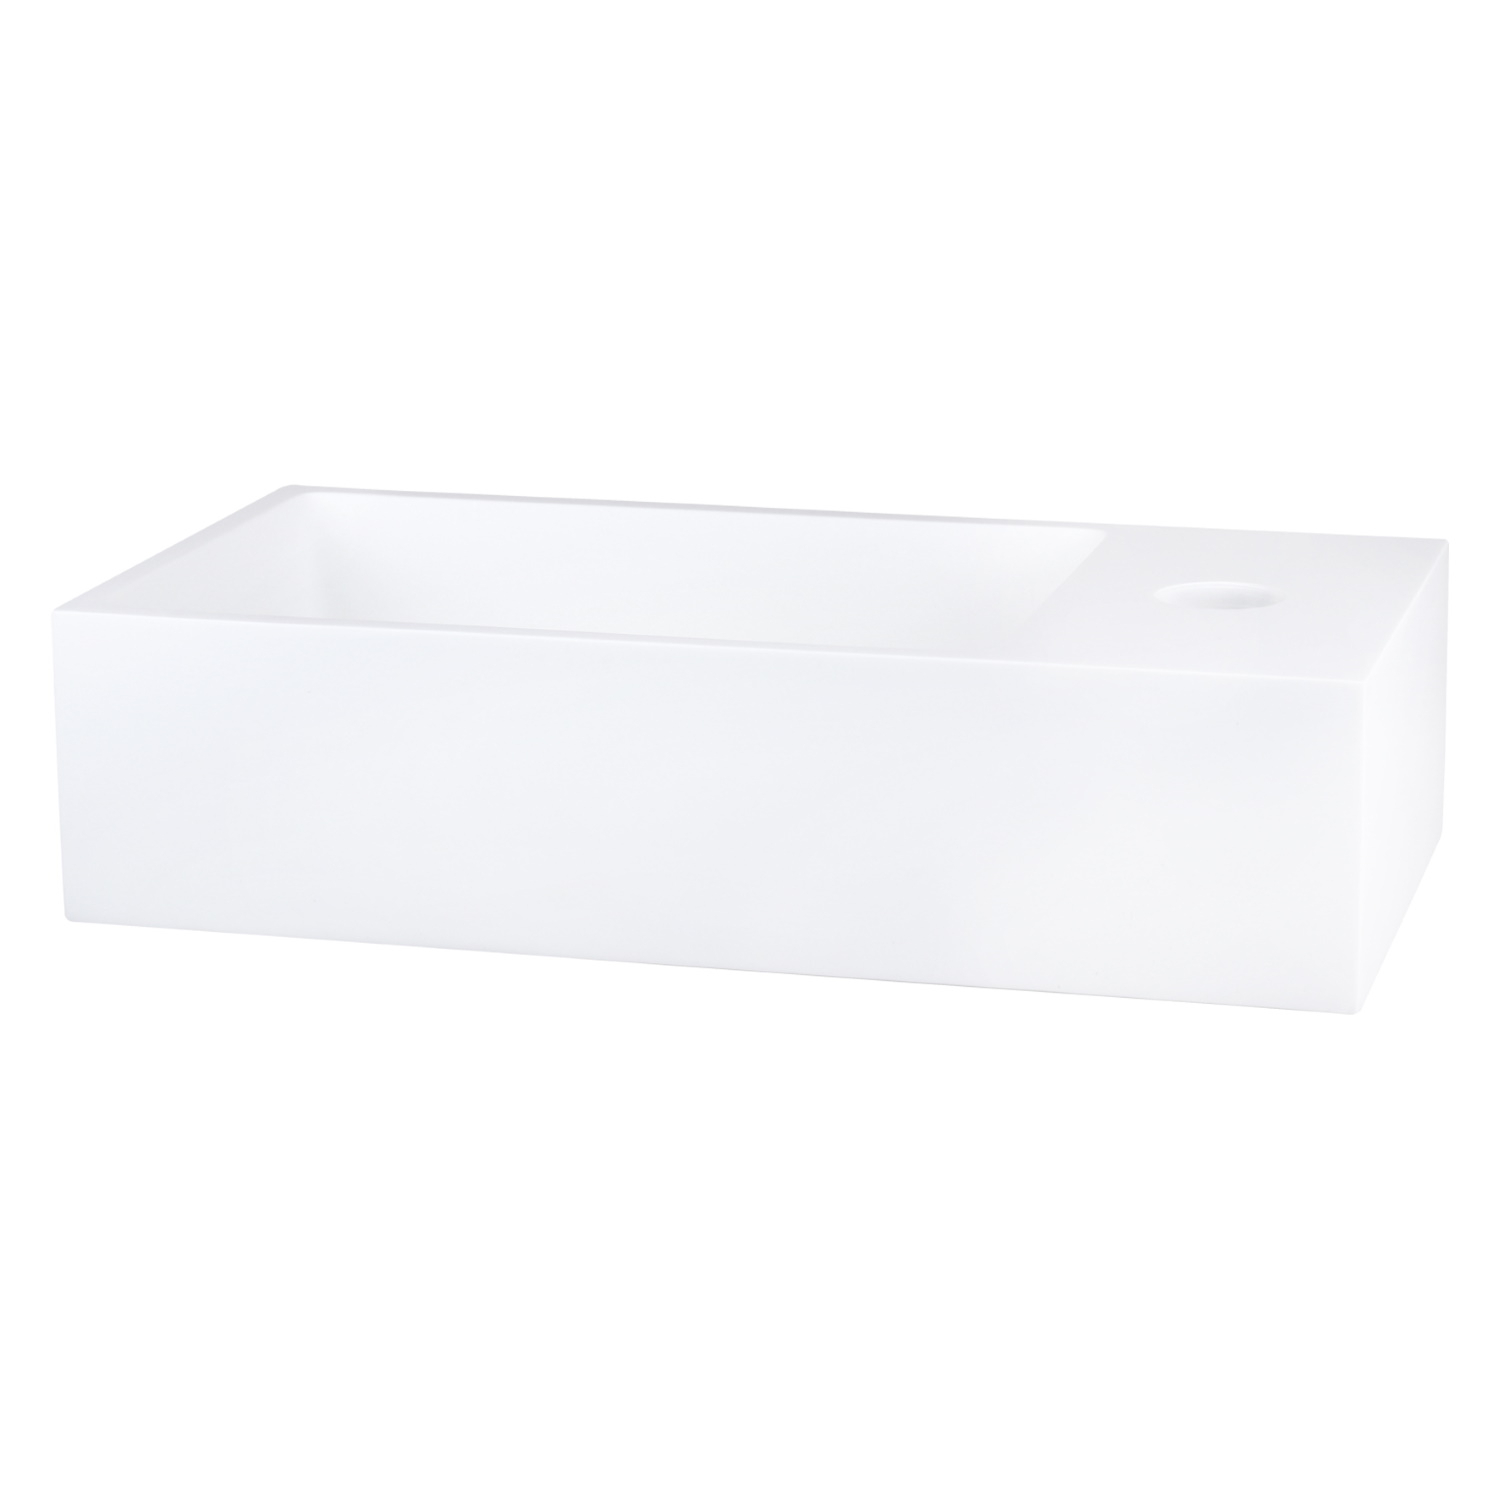 Differnz Solid fontein – Solid surface